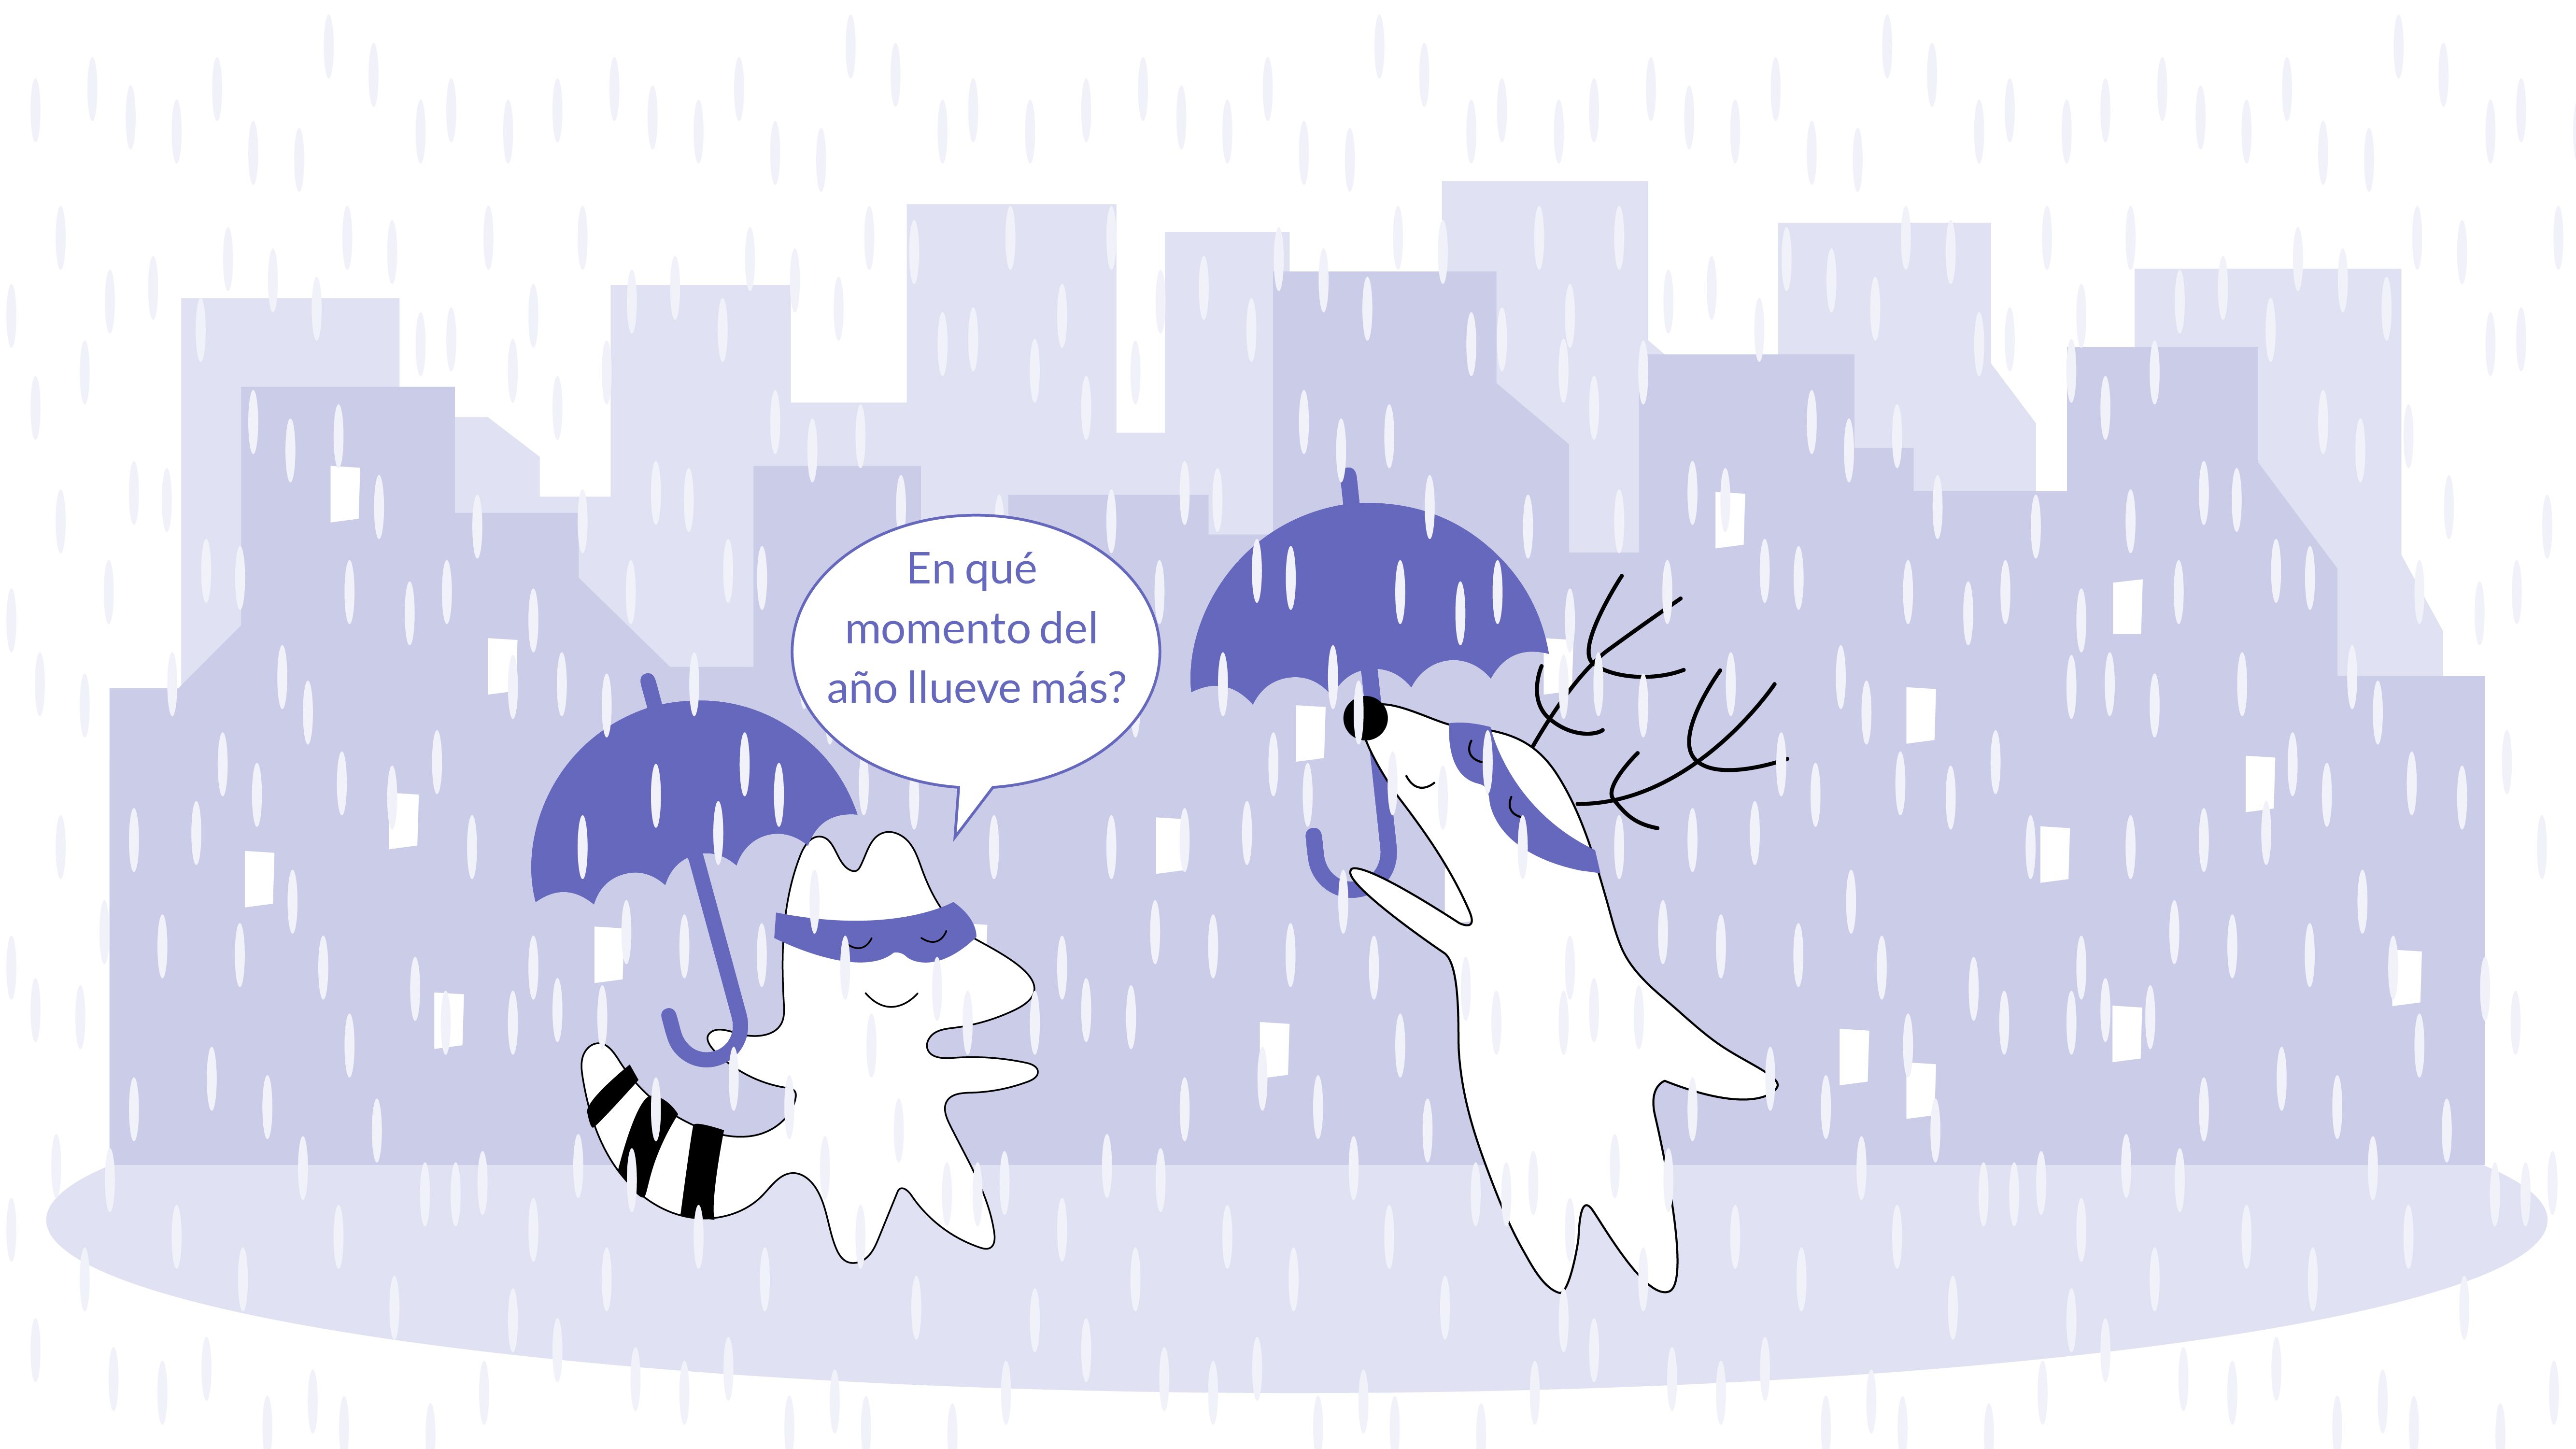 Iggy and Soren both on the street, it’s raining and they are holding umbrellas. Iggy asks “En qué momento del año llueve más?”